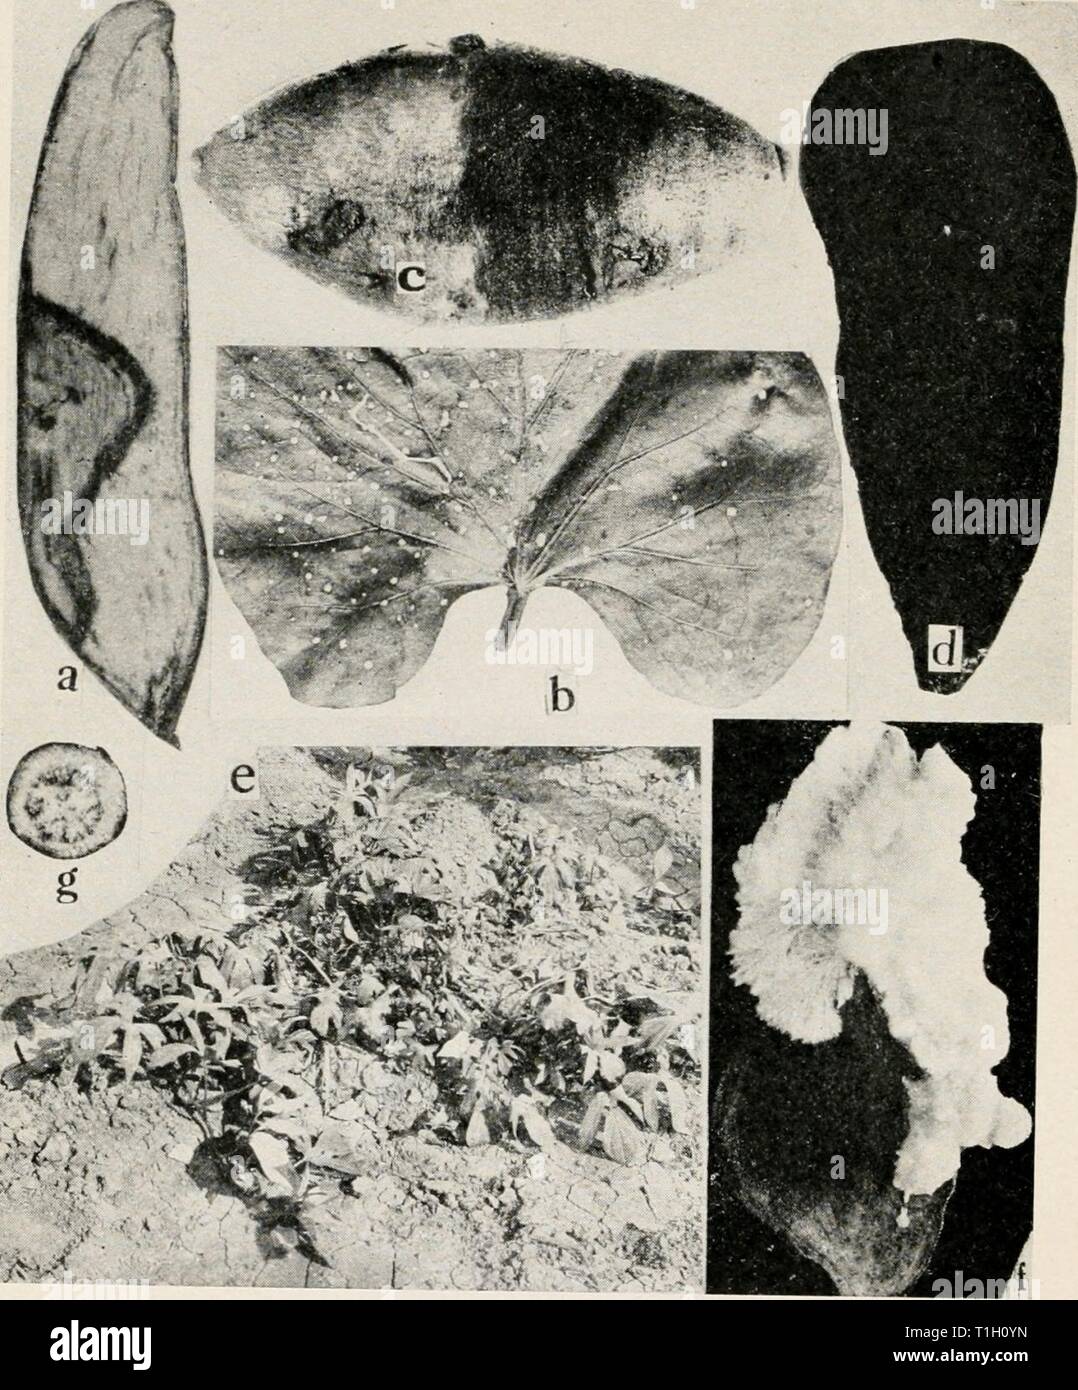 Diseases of truck crops and Diseases of truck crops and their control  diseasesoftruckc00taubuoft Year: [1918]  Fig. Sweet Potato Diseases. a. Trichoderma rot, b. Septoria leaf spot, c. soil stain d Charcoal rot  T Tre'Jfno''?'. V';.''''''' '.' '' ' d'' ile the si'de'shoots are lue as ttev are supported by the secondary roots formed at the nodes of the vines /,wlJ potato artificially inoculated with Sclerotium Rolfsii. g. net necrosfs. ' Stock Photo